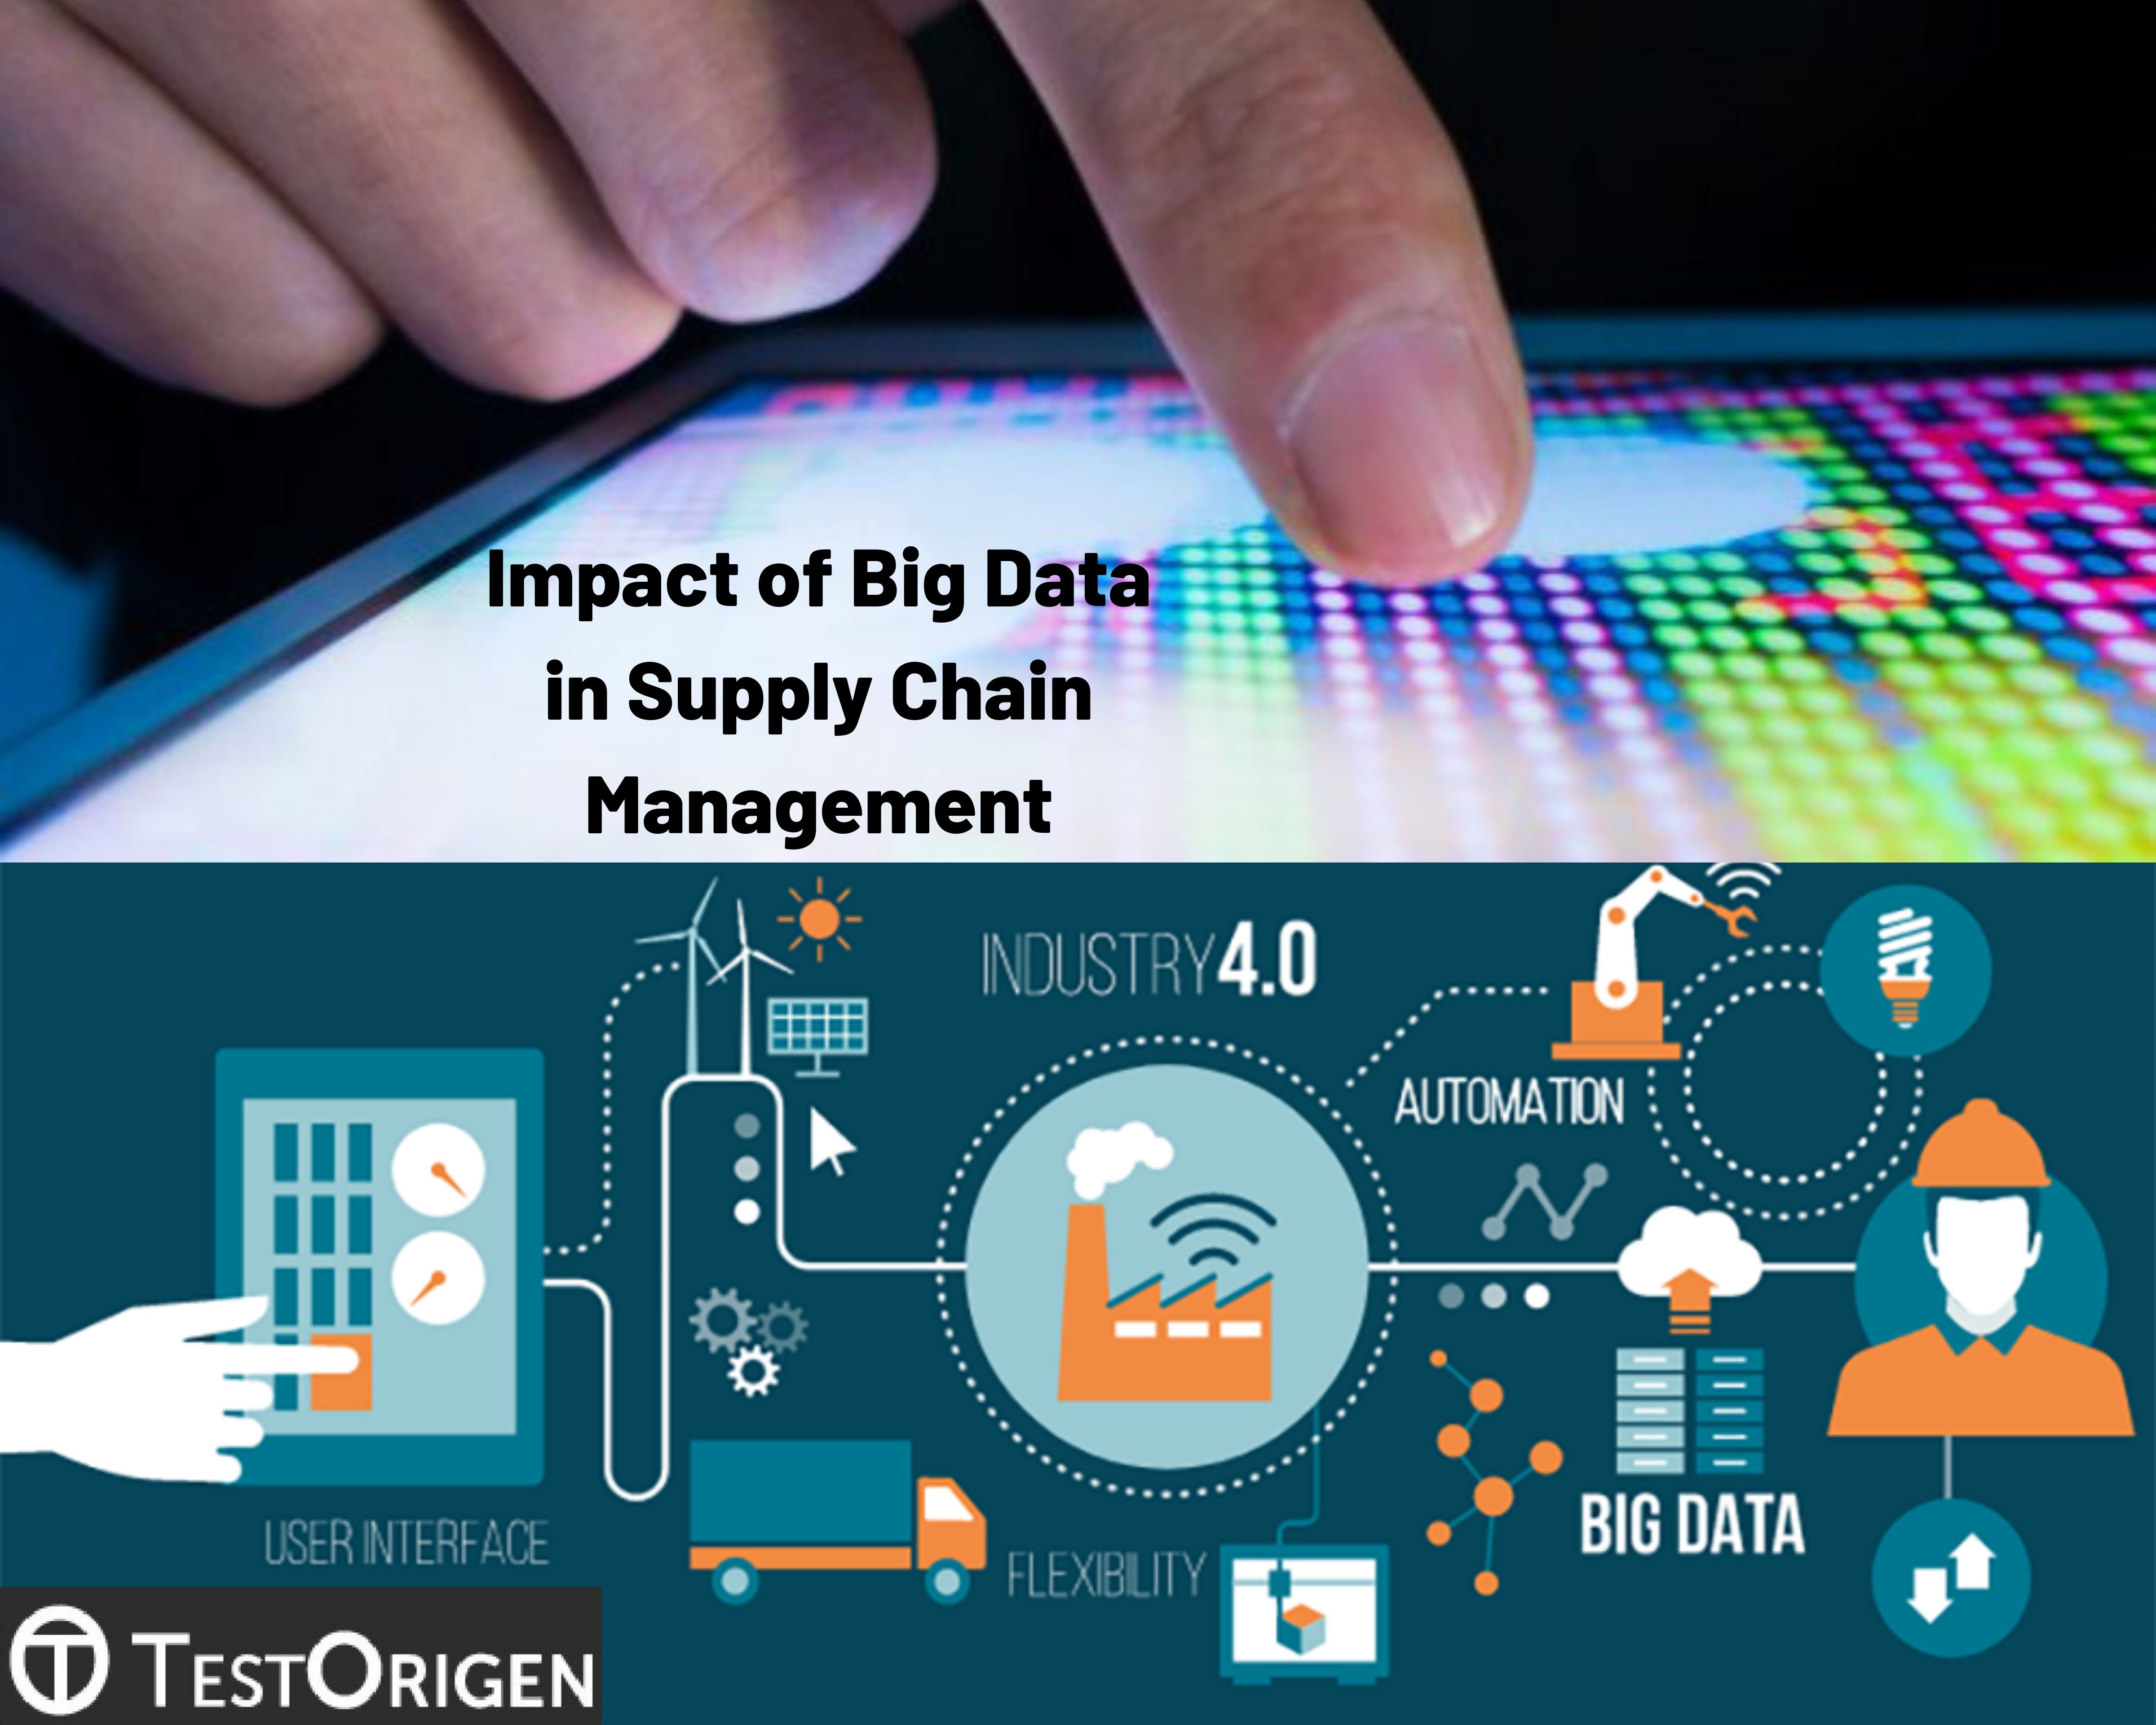 Impact of Big Data in Supply Chain Management